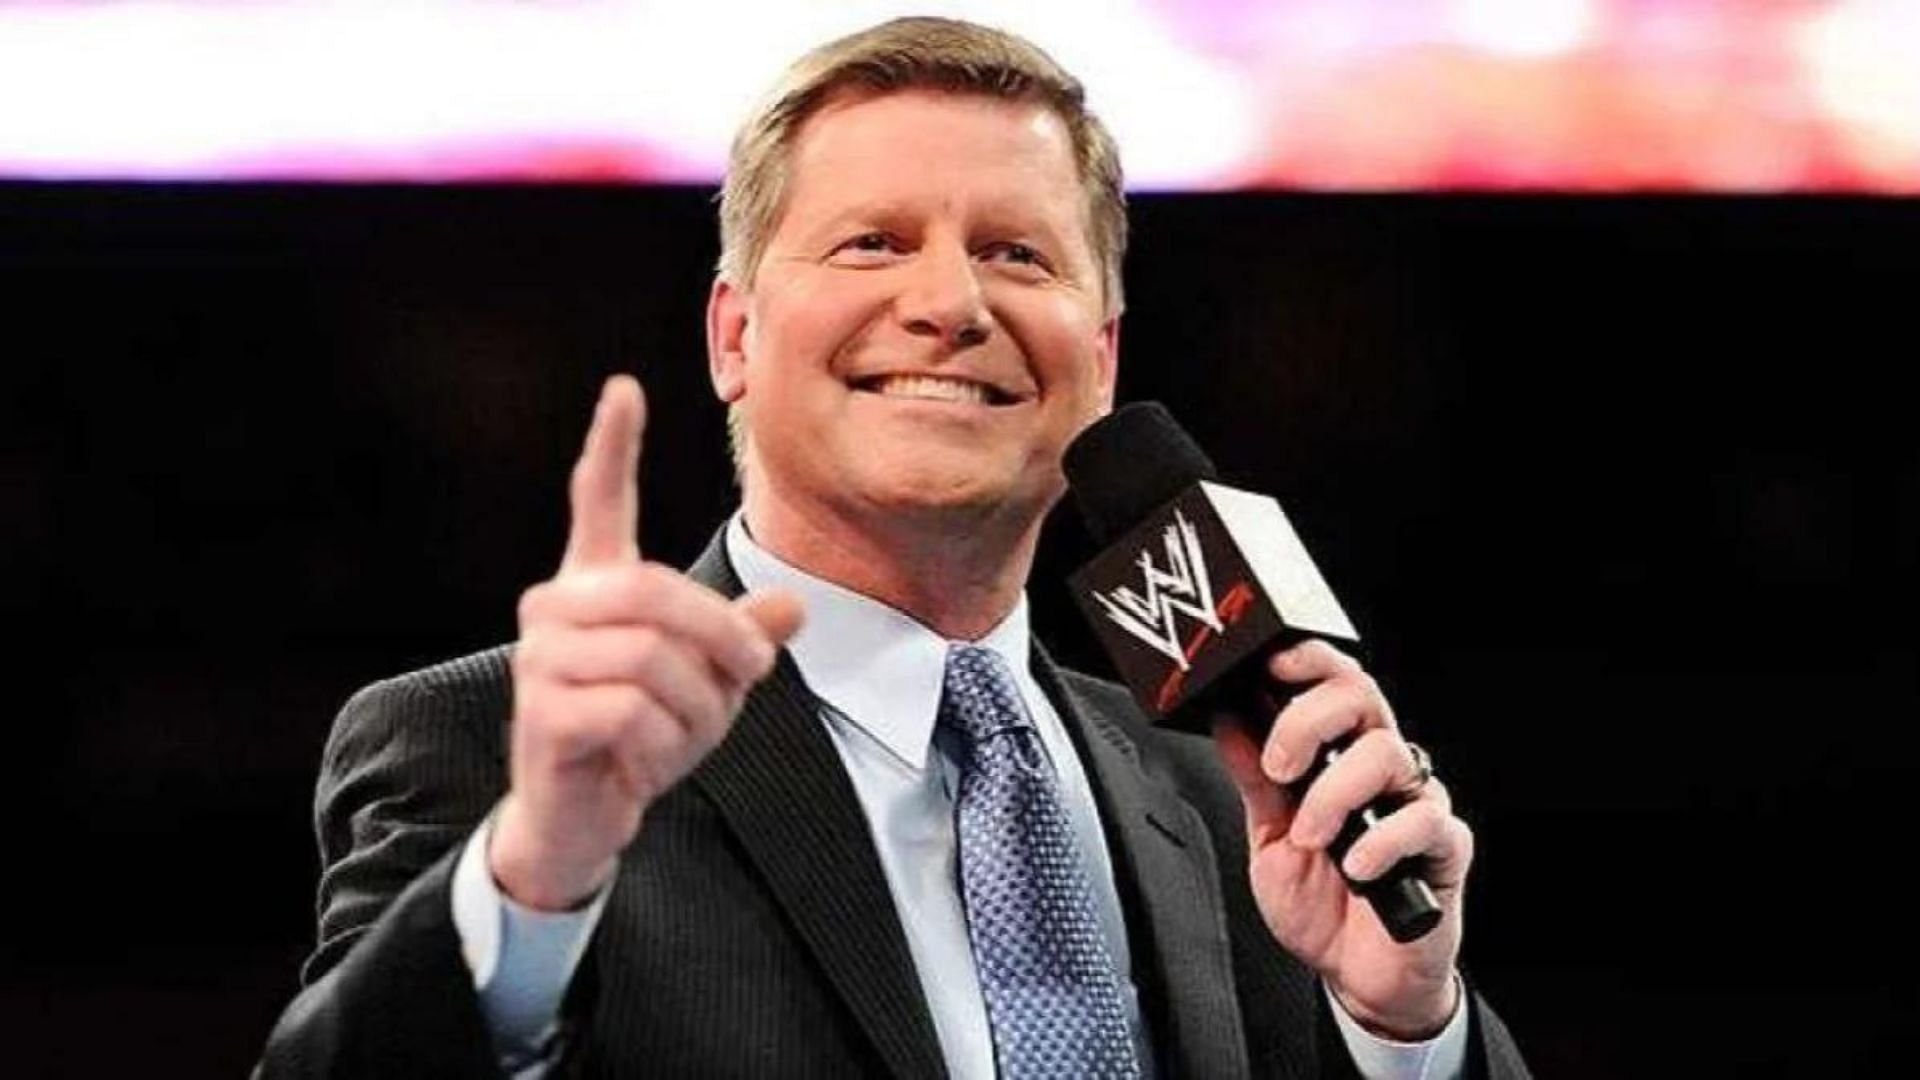 Why did John Laurinaitis pass up on signing an established tag team?